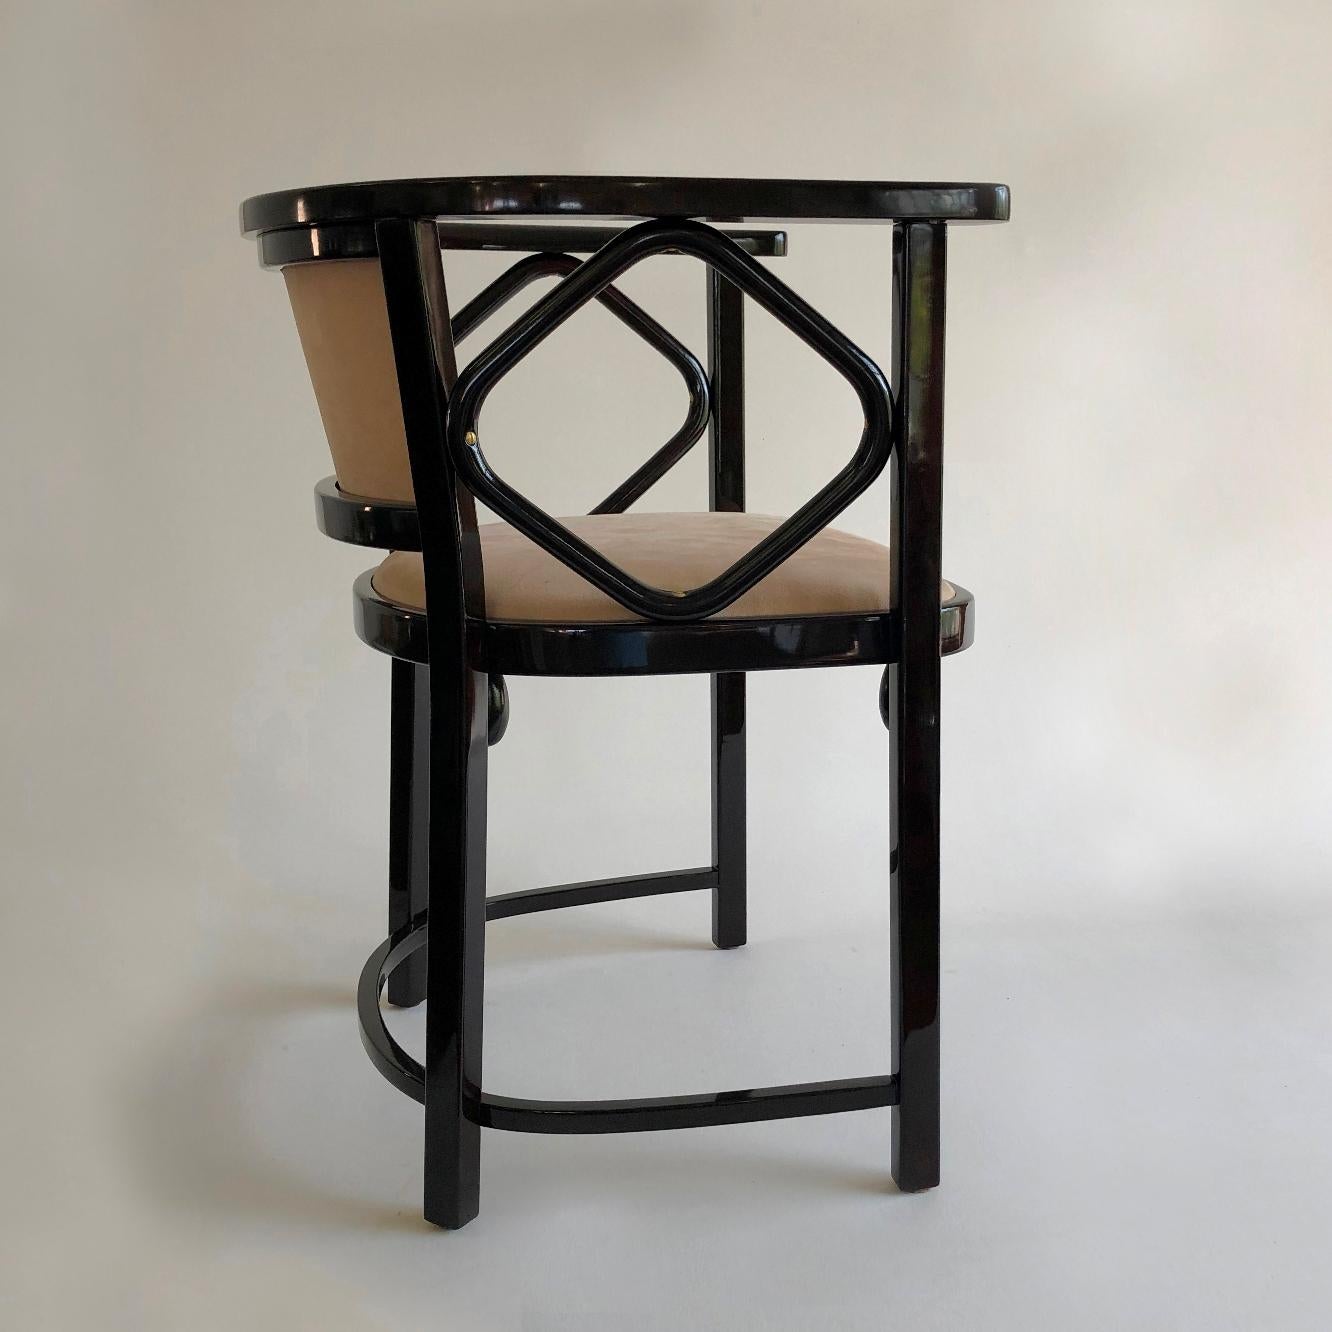 12 Josef Hoffmann Attributed Thonet Bentwood Fledermaus Chairs, Austria, 1930s For Sale 9